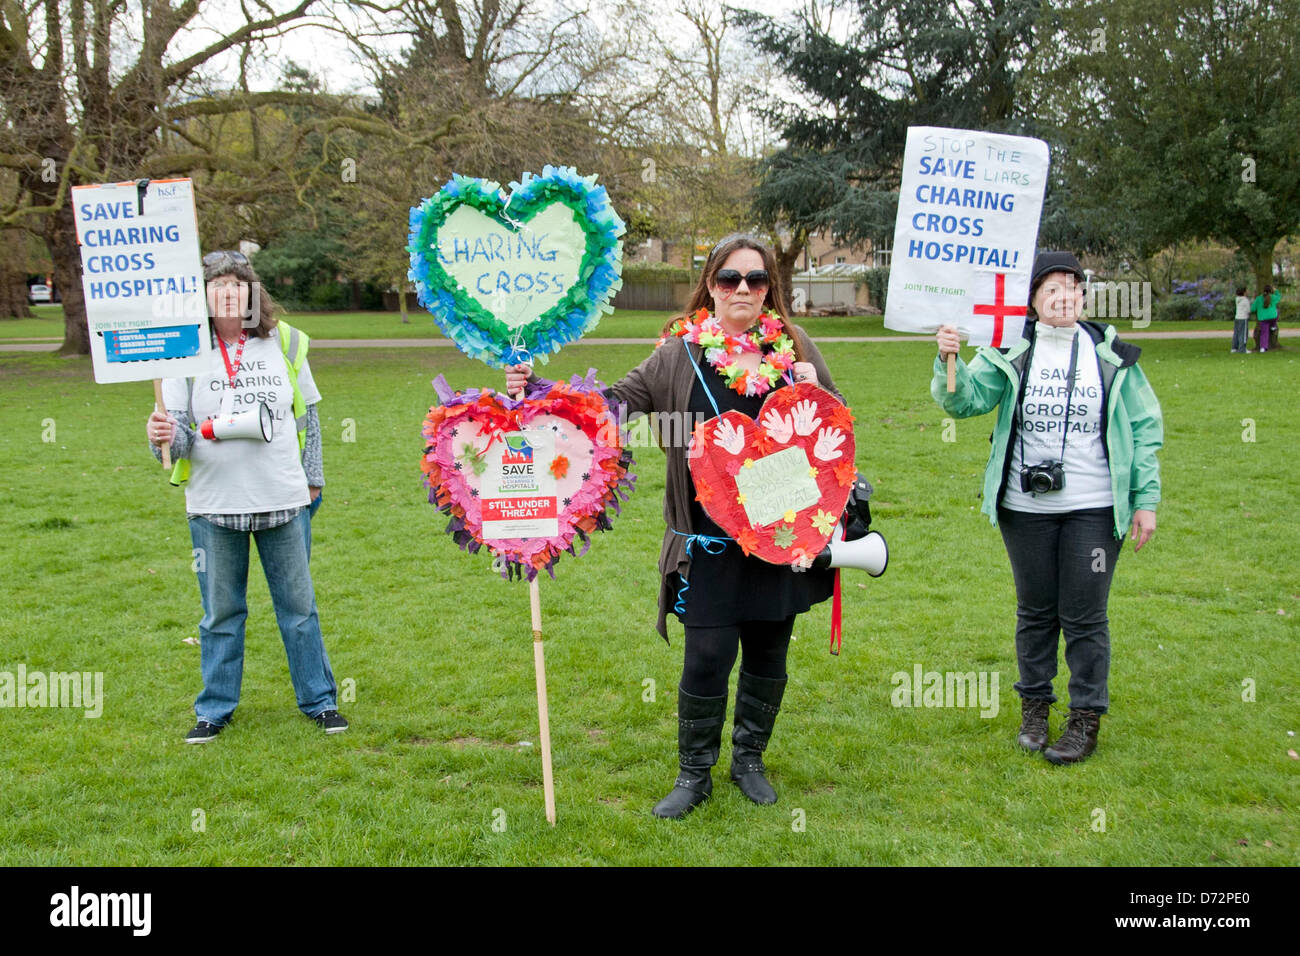 London, UK. 27th April 2013. Protesters marching from Acton Park to Ealing Common to hold a rally against the closure of vital services at Ealing Hospital, such as the A&E and Maternity wing. Credit: Pete Maclaine/Alamy Live News Stock Photo